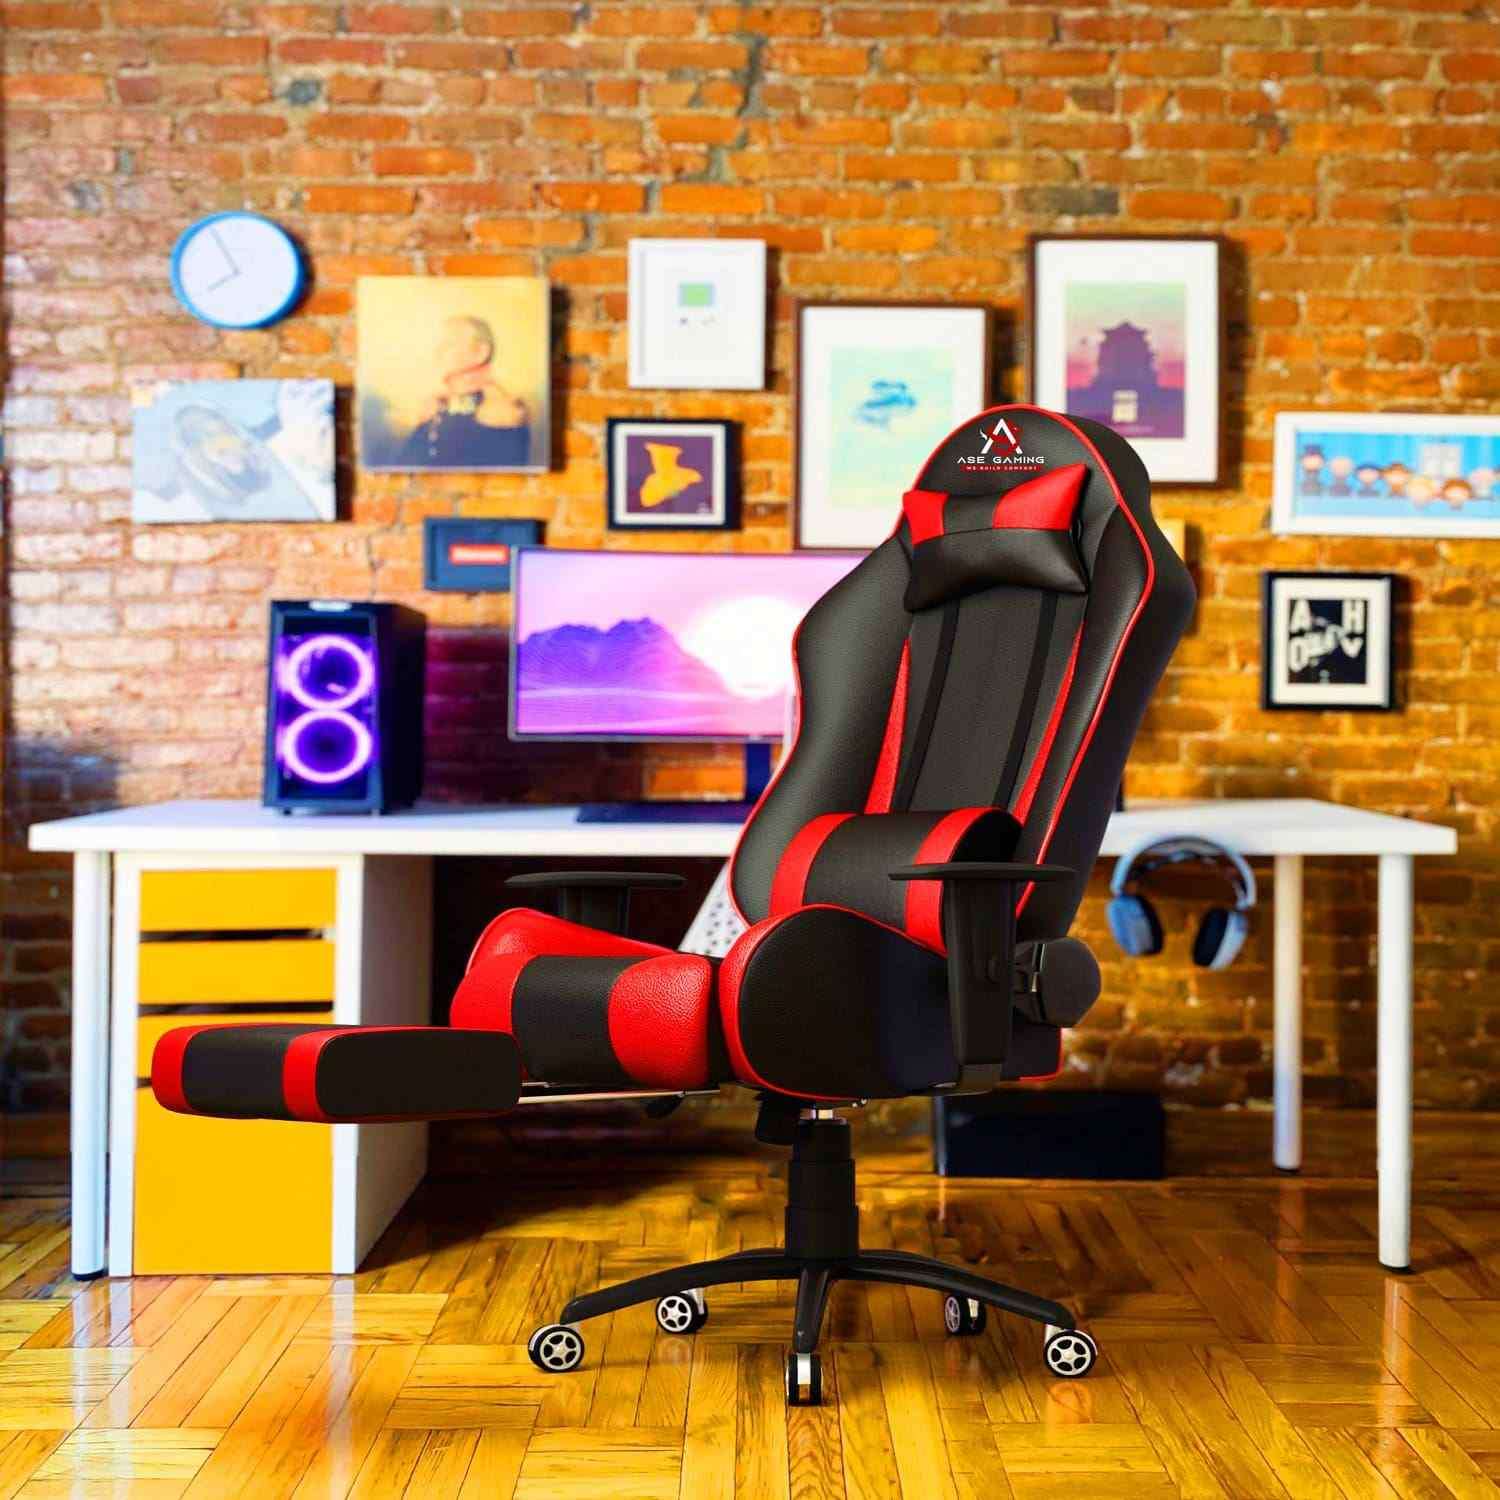 ASE Gaming Gold Series Gaming Chair with 180 Degree Recline (Red & Black)